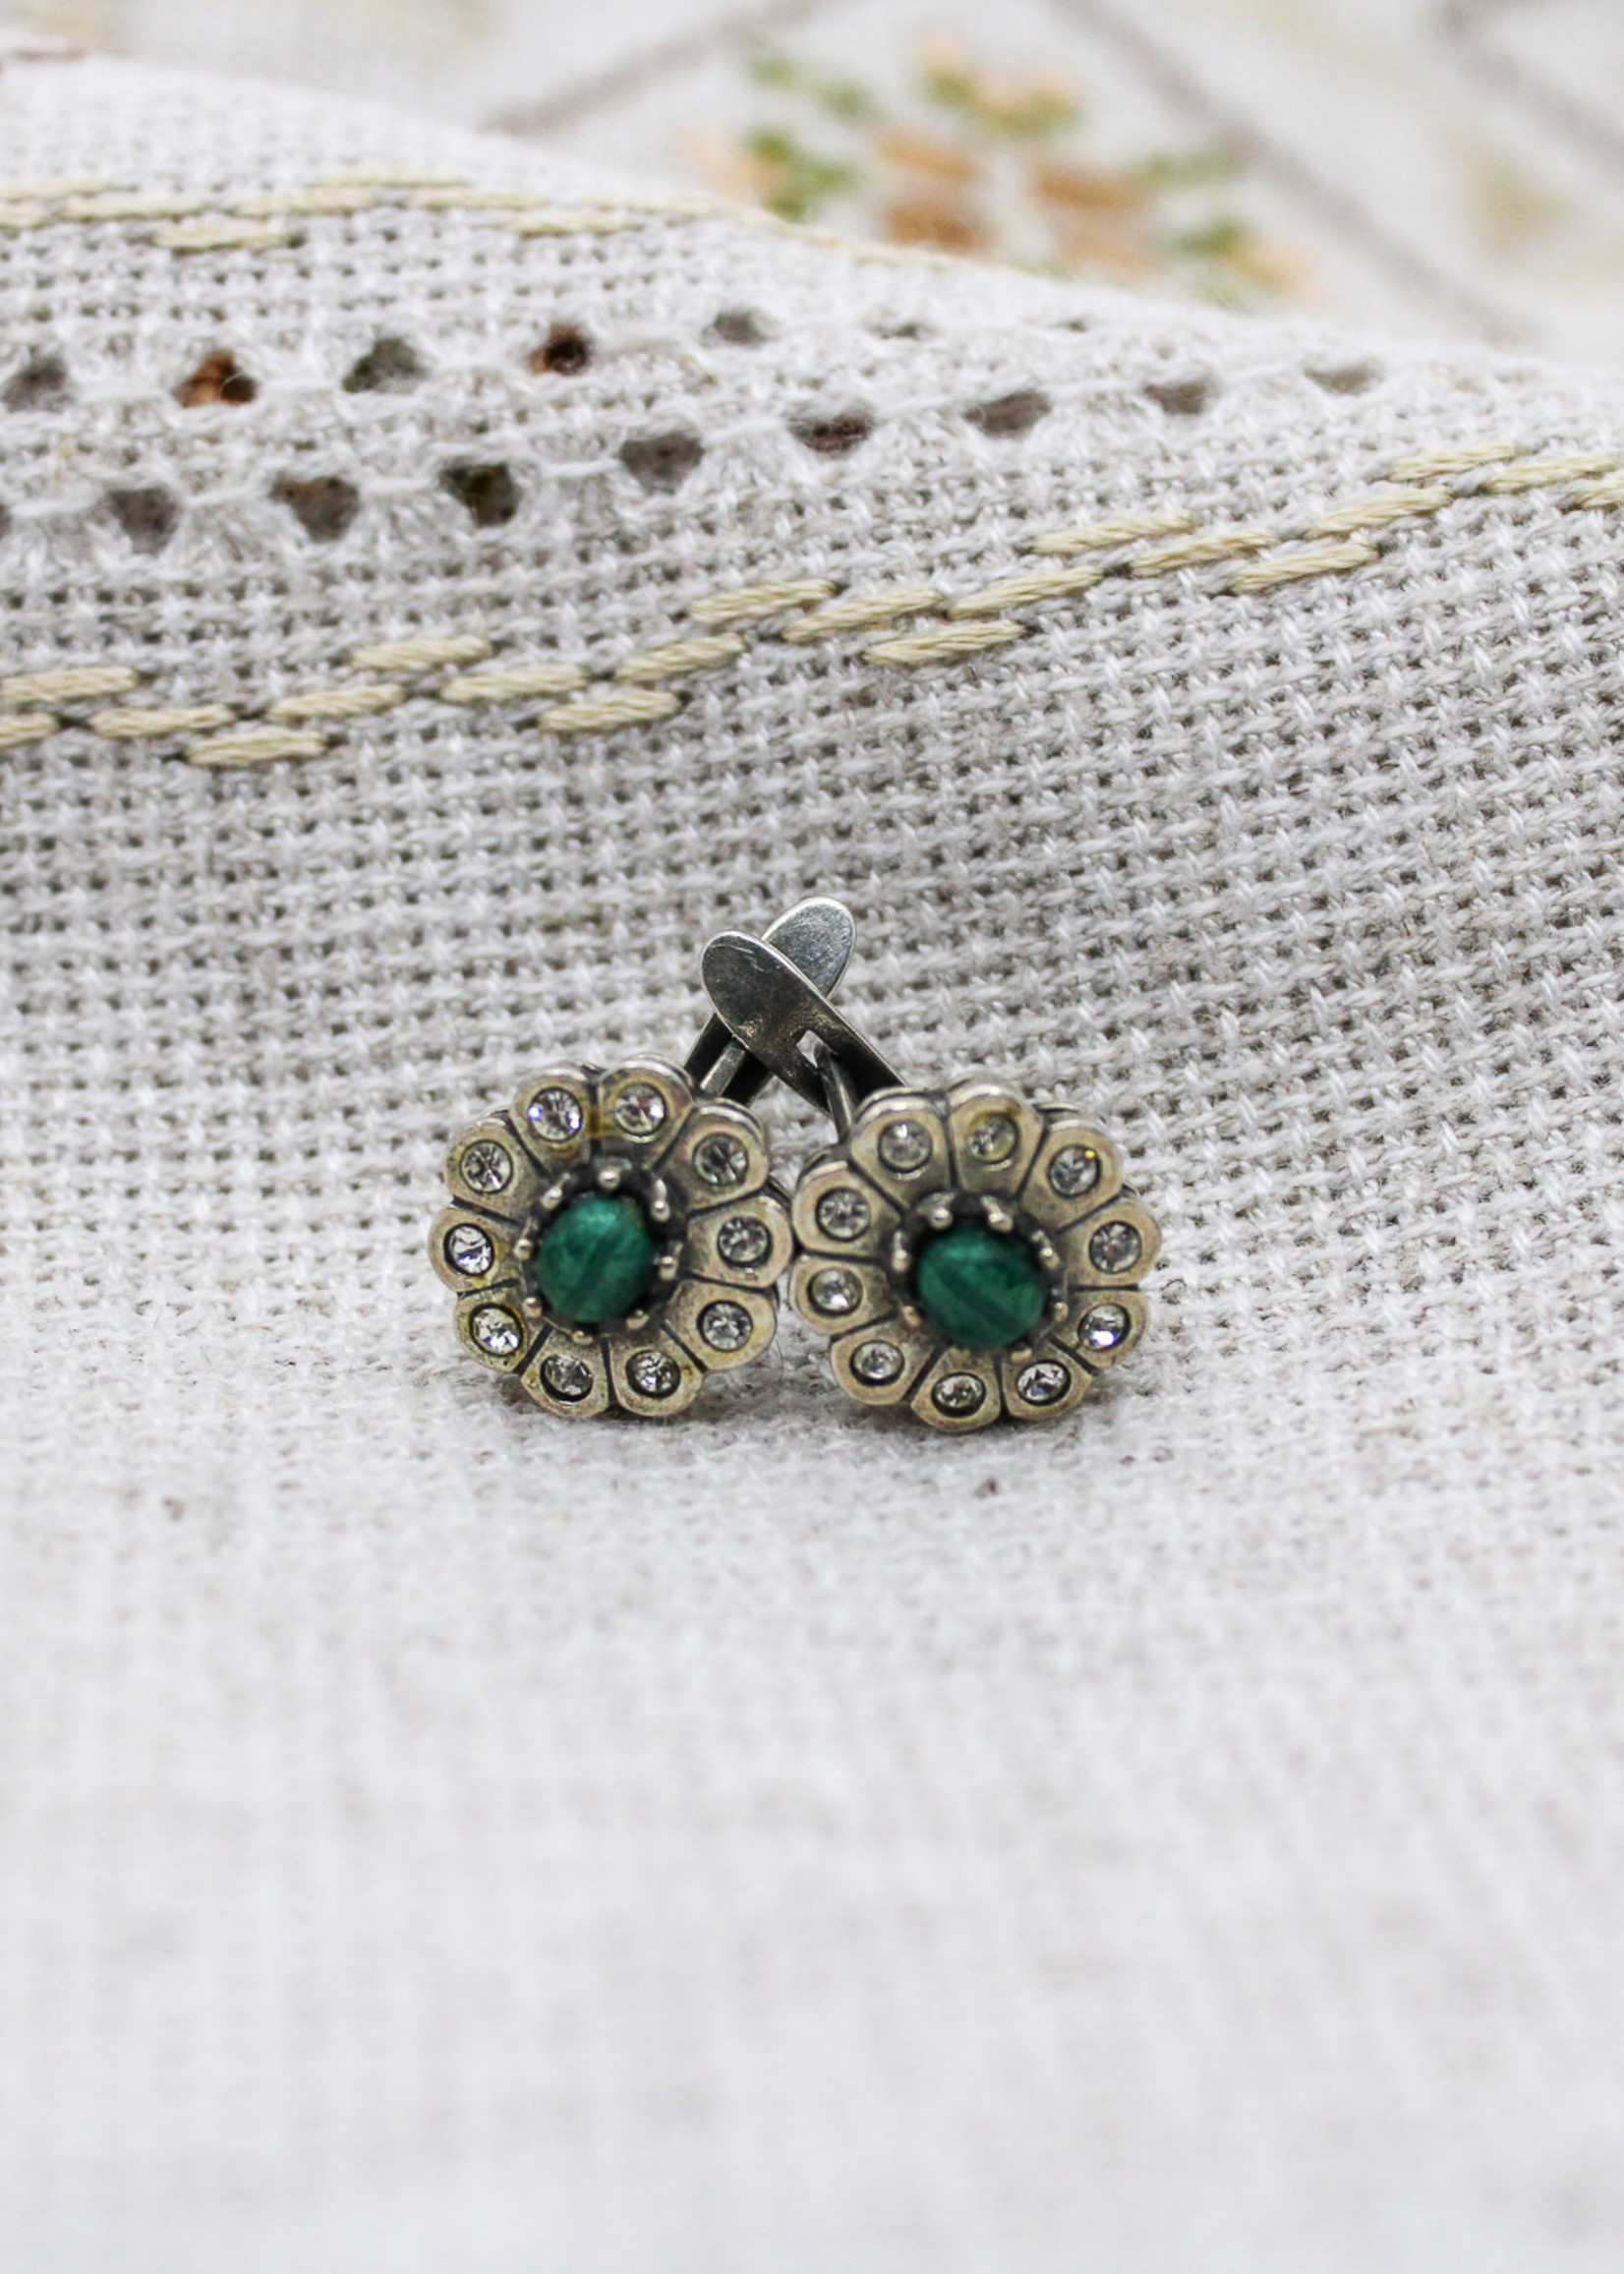 JEWELRY -  Earrings, Flower Style with Green Stone